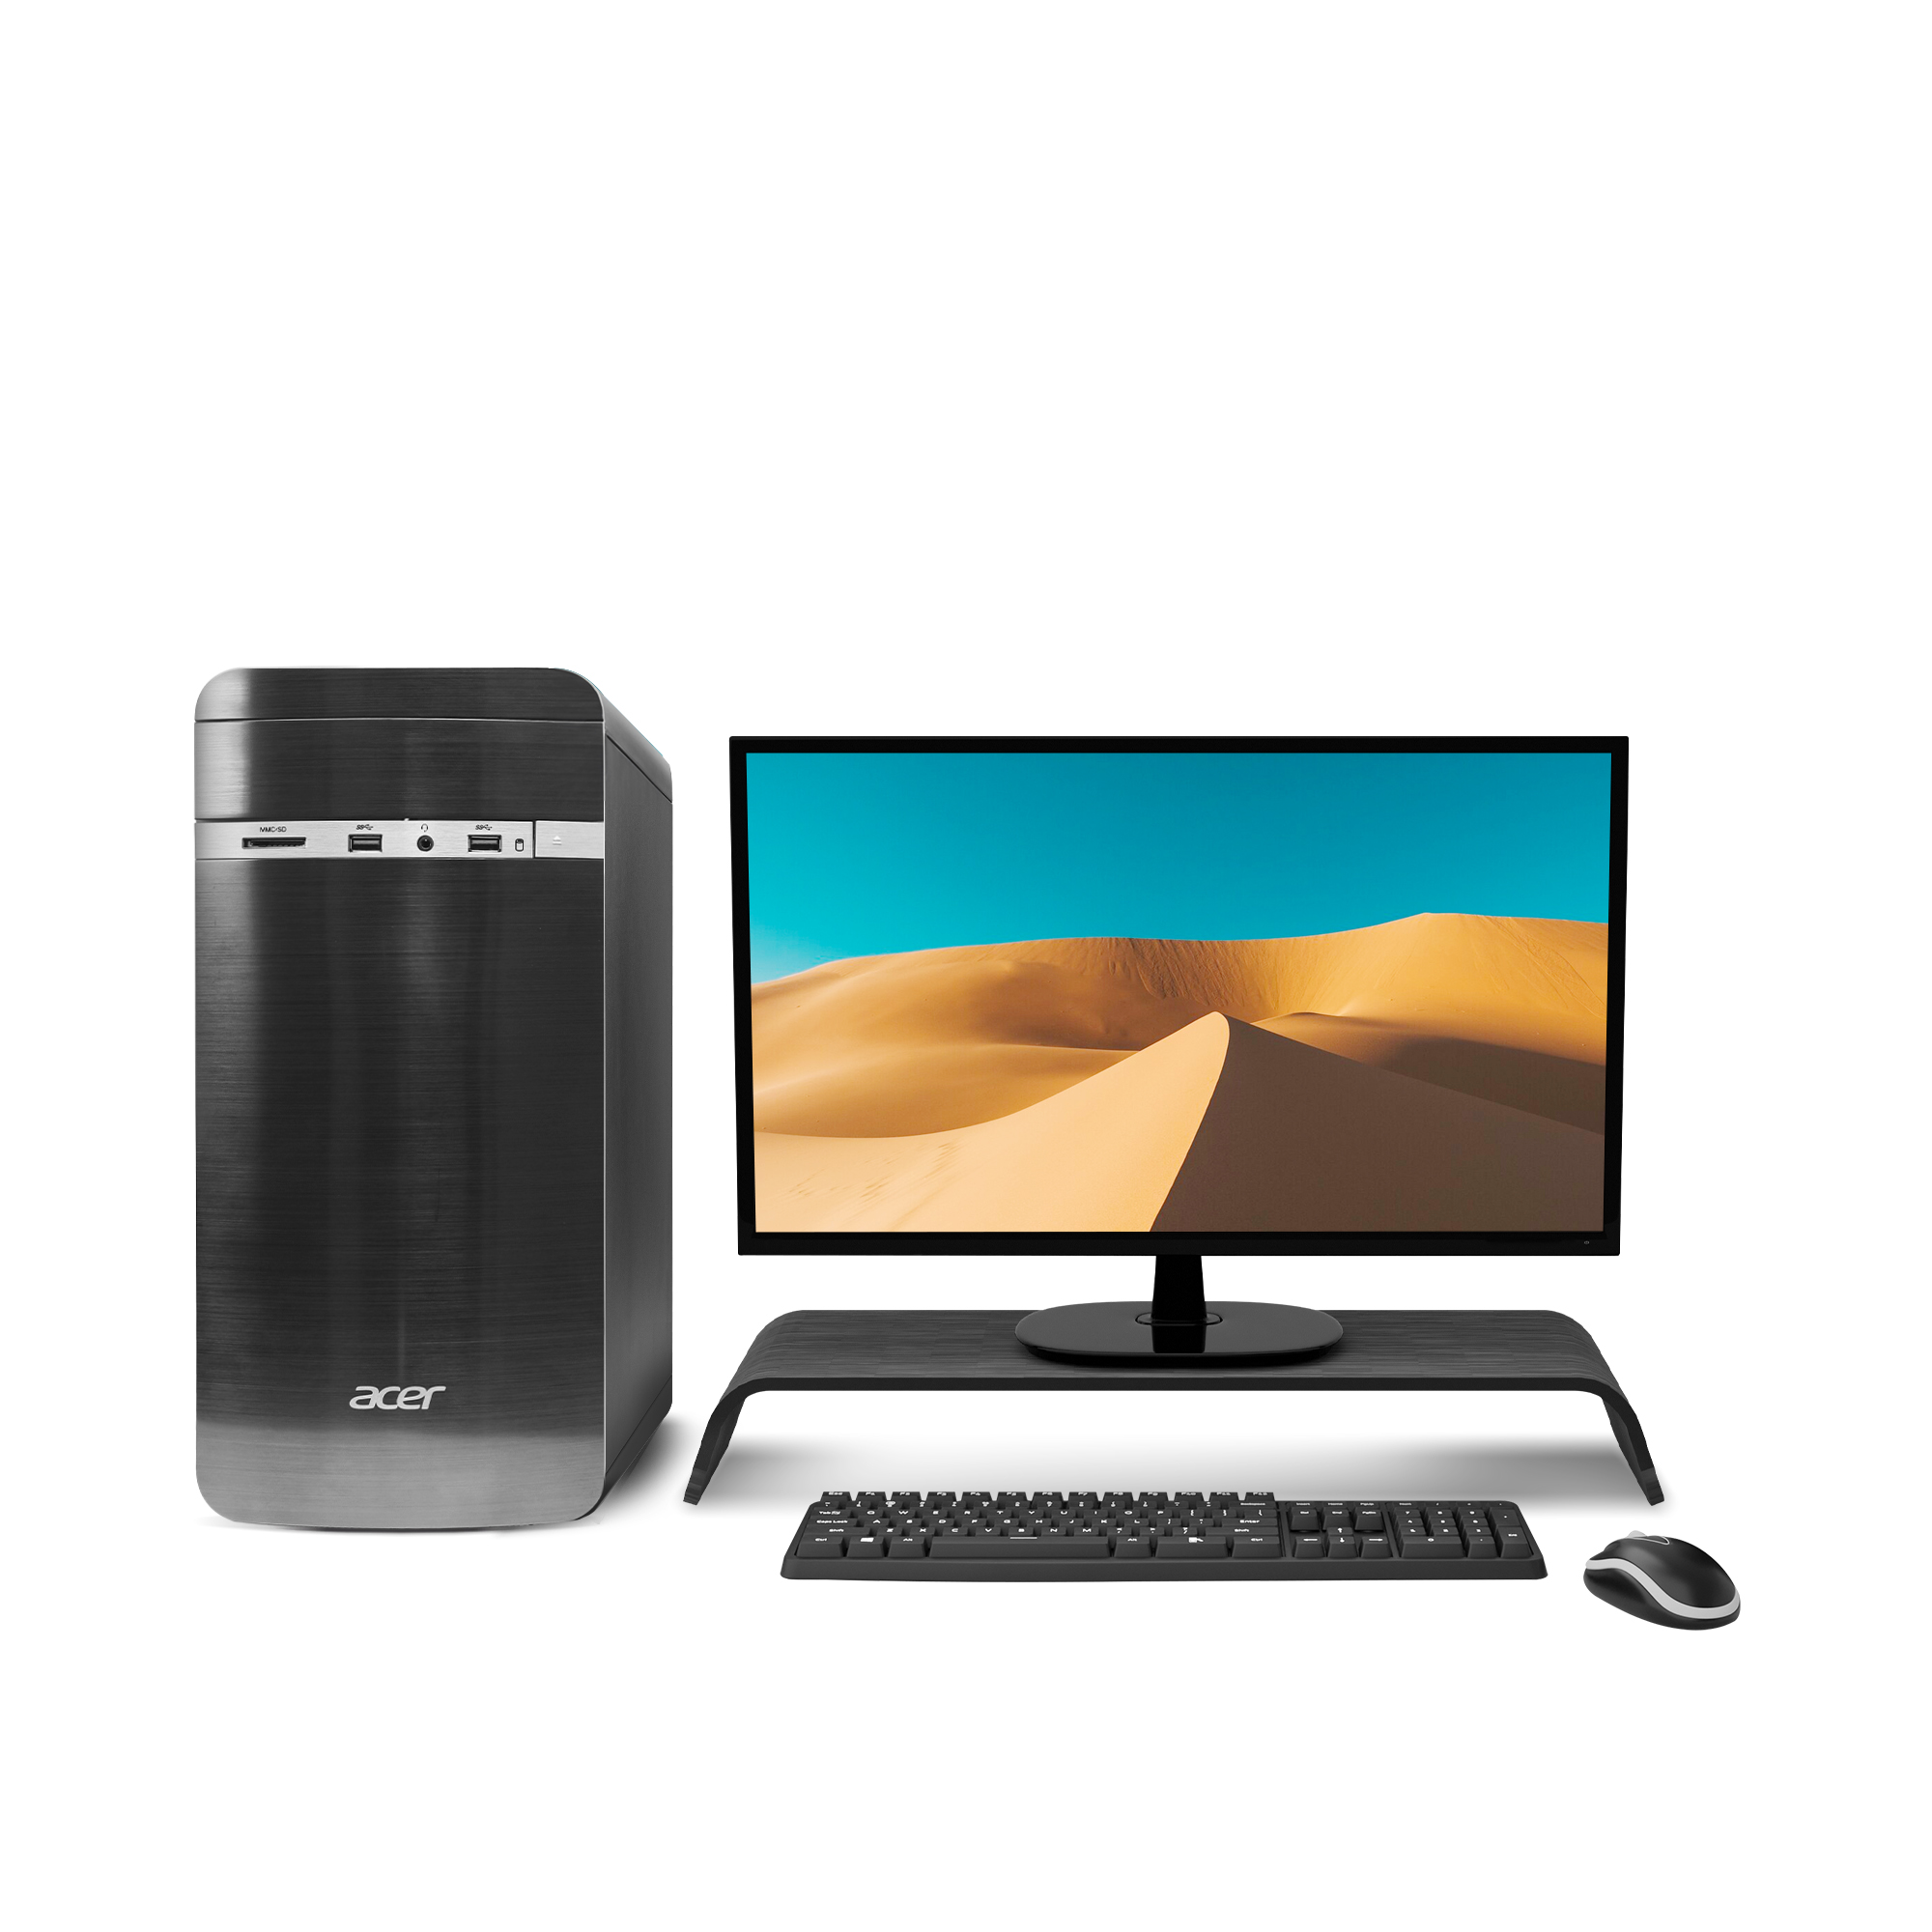 Acer expands its consumer range with the newly launched Aspire Desktop